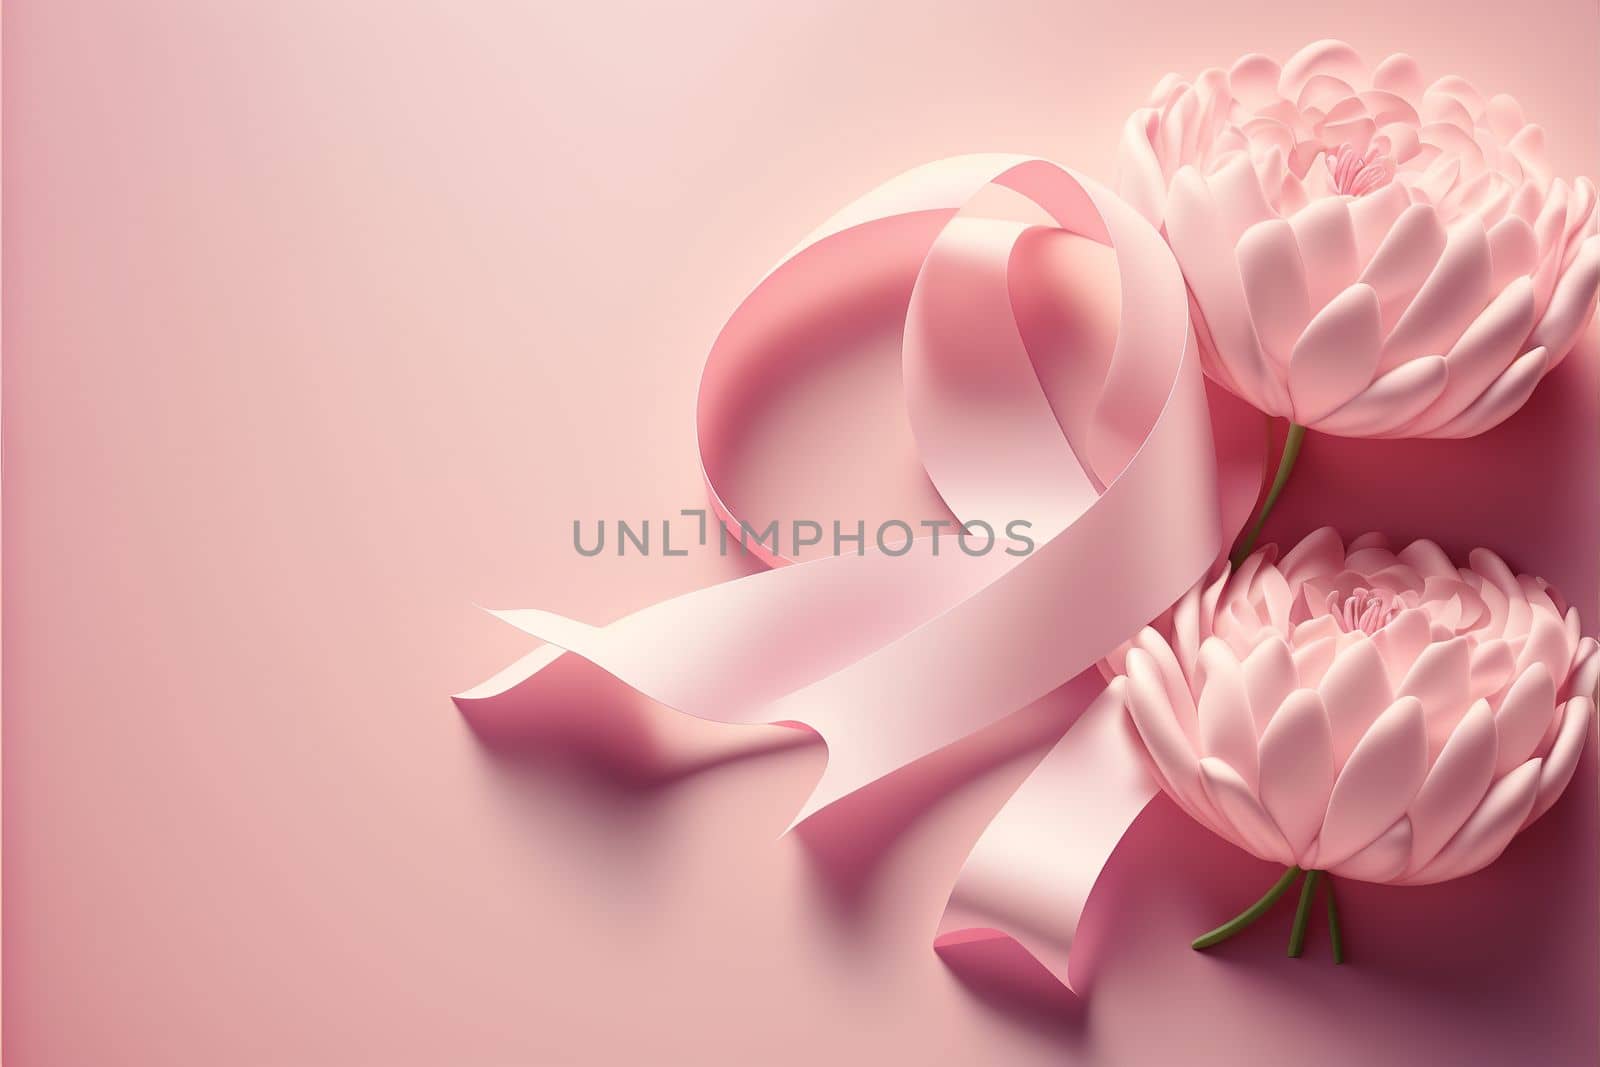 pink ribbon international women's day. March 8 background design. Women's Day greeting text on March 8 with pink ribbon and camellia flower elements for international women's day by gulyaevstudio